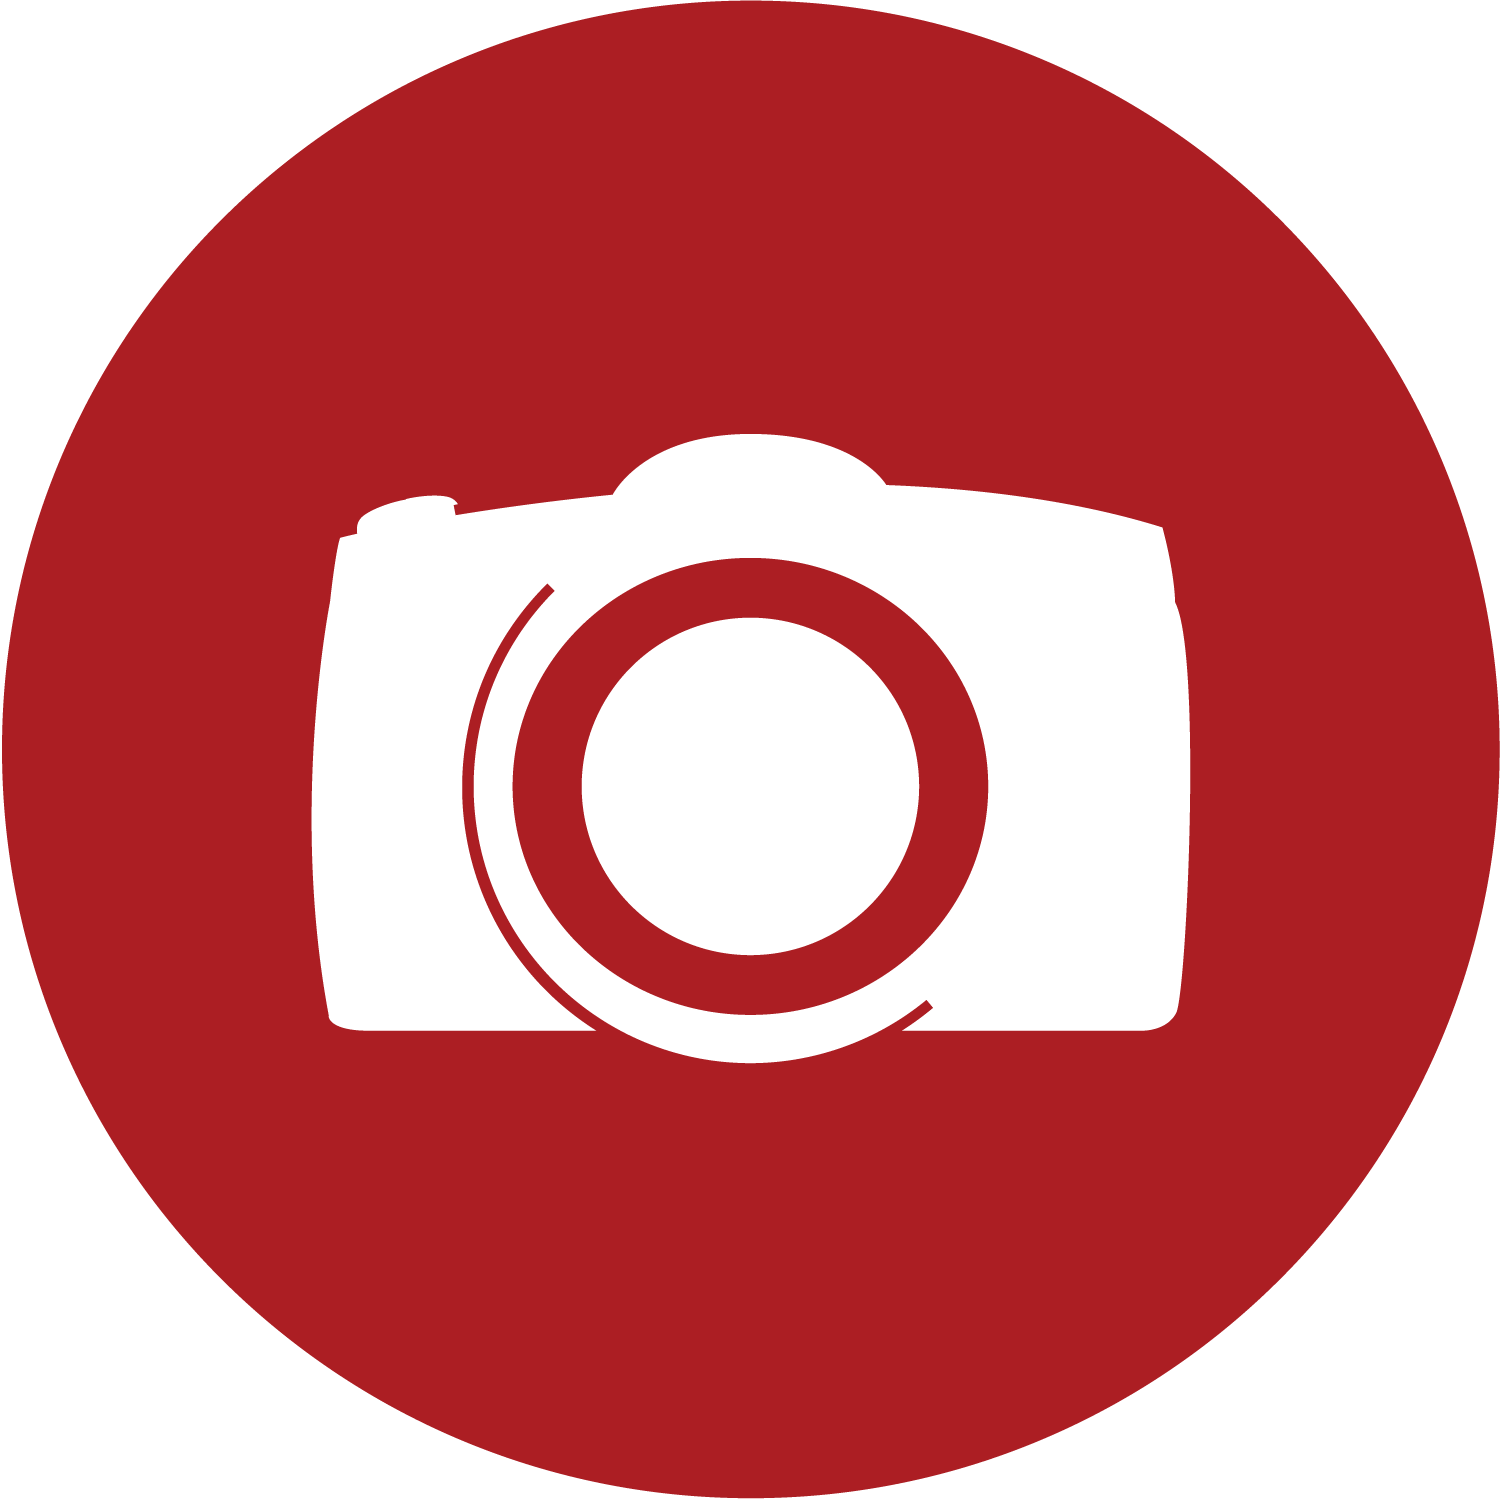 Lenovo SNAPit and SEEit Camera. APK For Android [Free App 